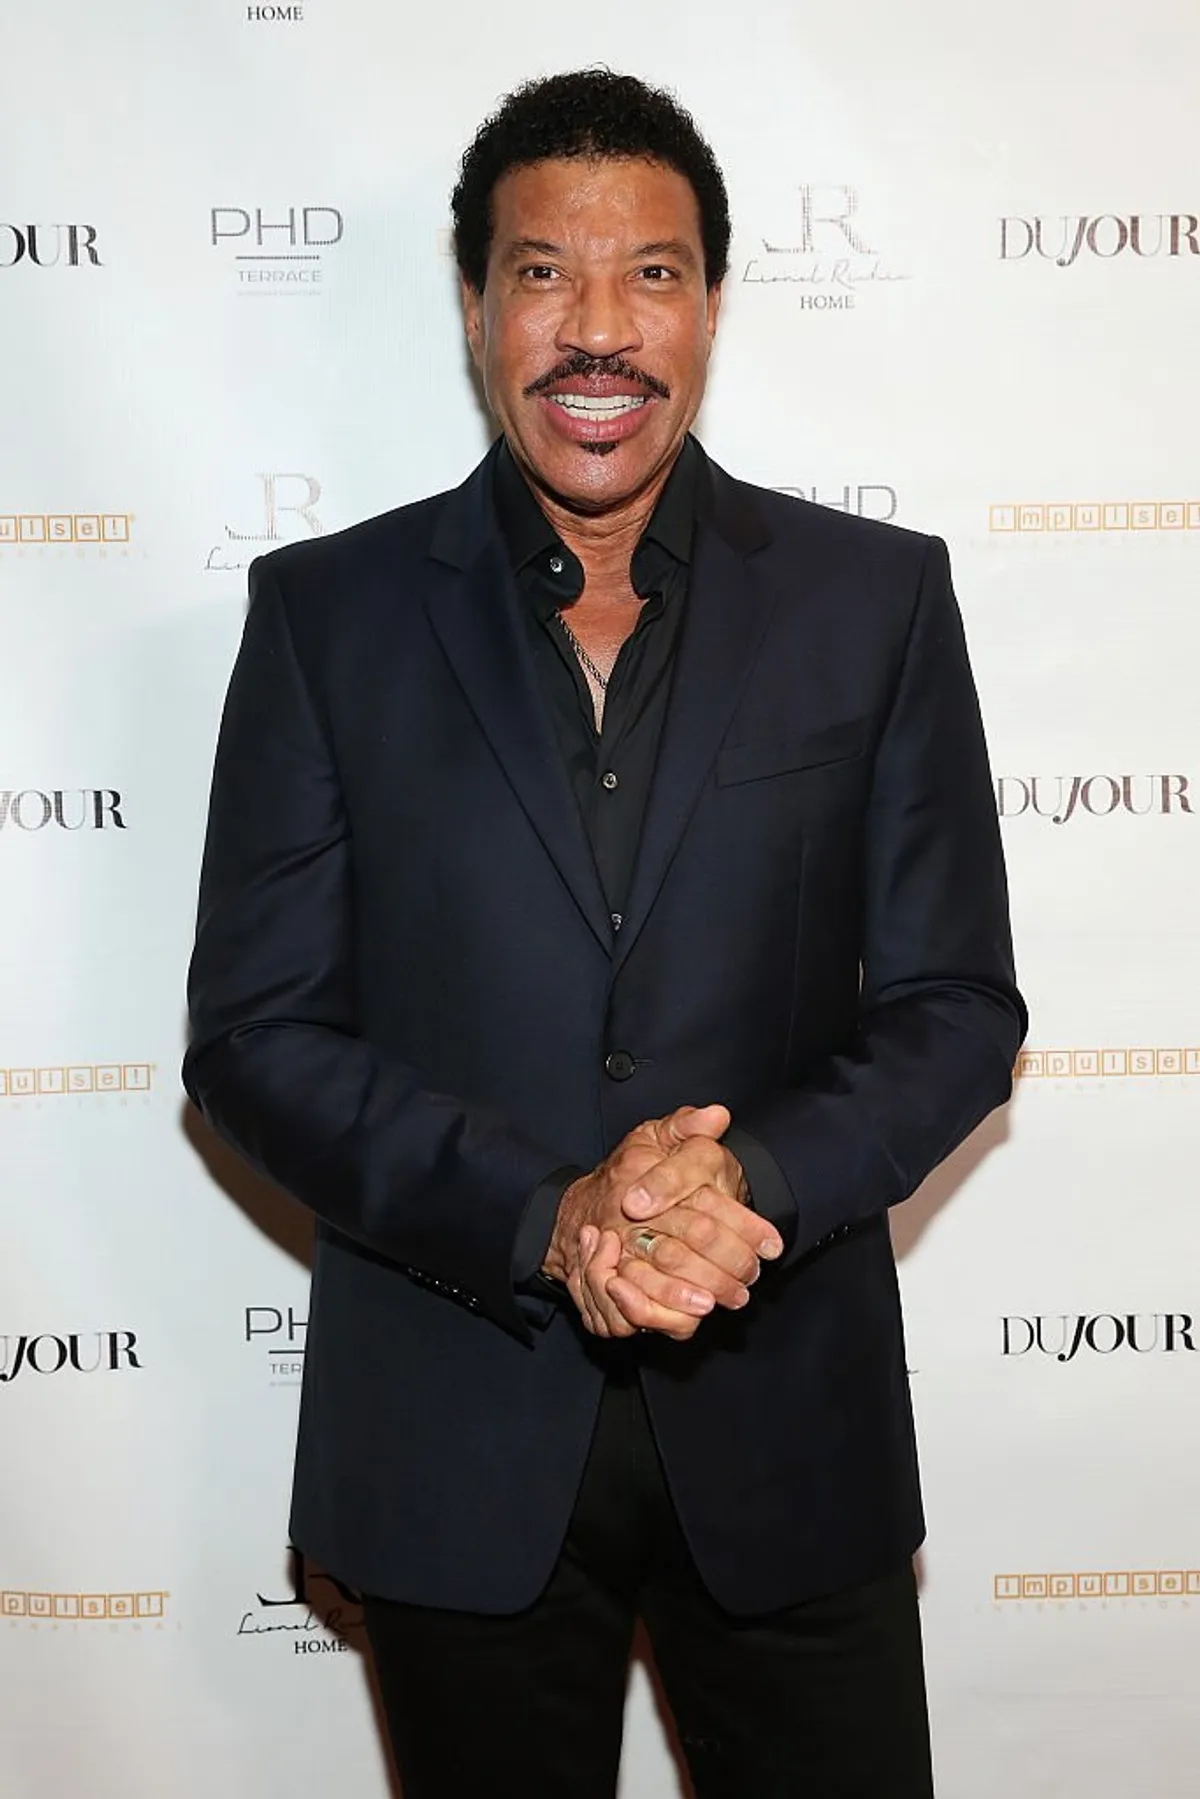 Lionel Richie at Jason Binn's DuJour Magazine and Lionel Richie Home Collection launch, 2015, New York City. | Photo: Getty Images